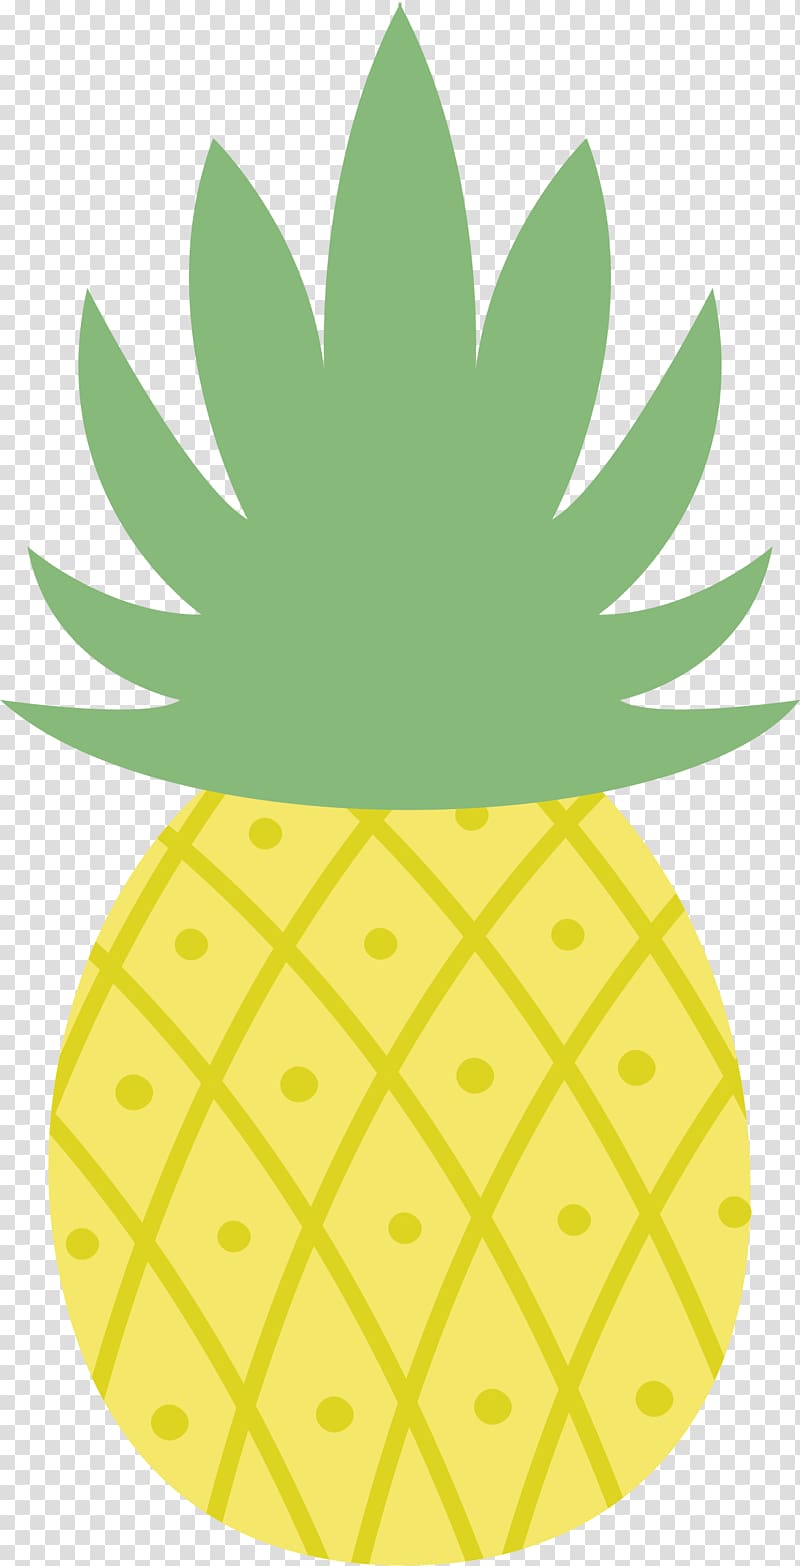 pineapple illustration, Pineapple Scalable Graphics , Yellow cartoon pineapple transparent background PNG clipart